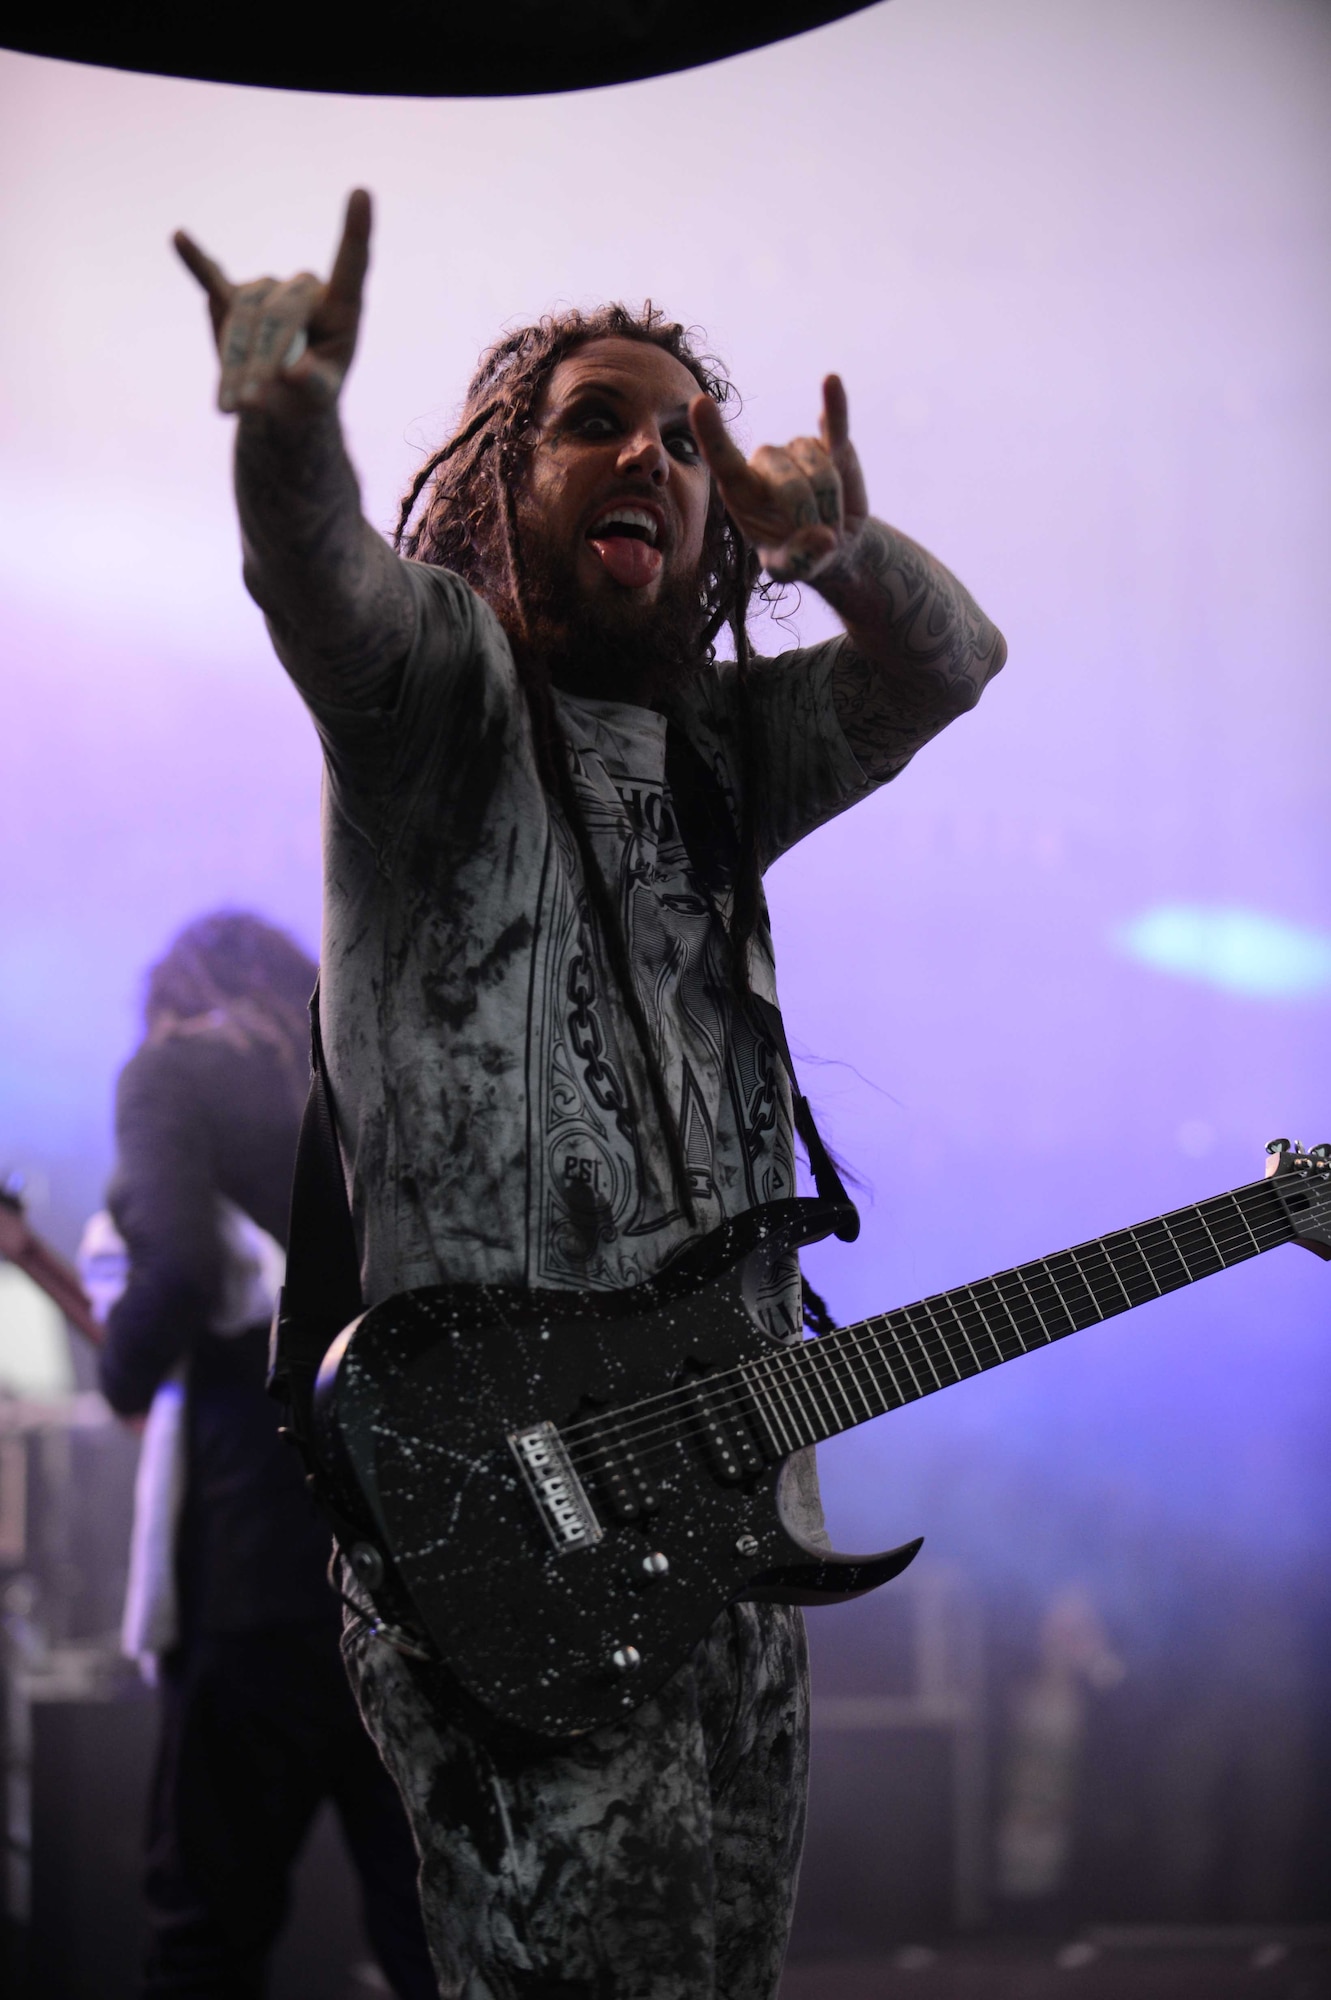 SPANGDAHLEM AIR BASE, Germany – Brian Welch entertains the audience during a performance July 3, 2013 Korn released their first demo music in 1993 and went on to win two Grammy awards. (U.S. Air Force photo by Airman 1st Class Kyle Gese/Released)